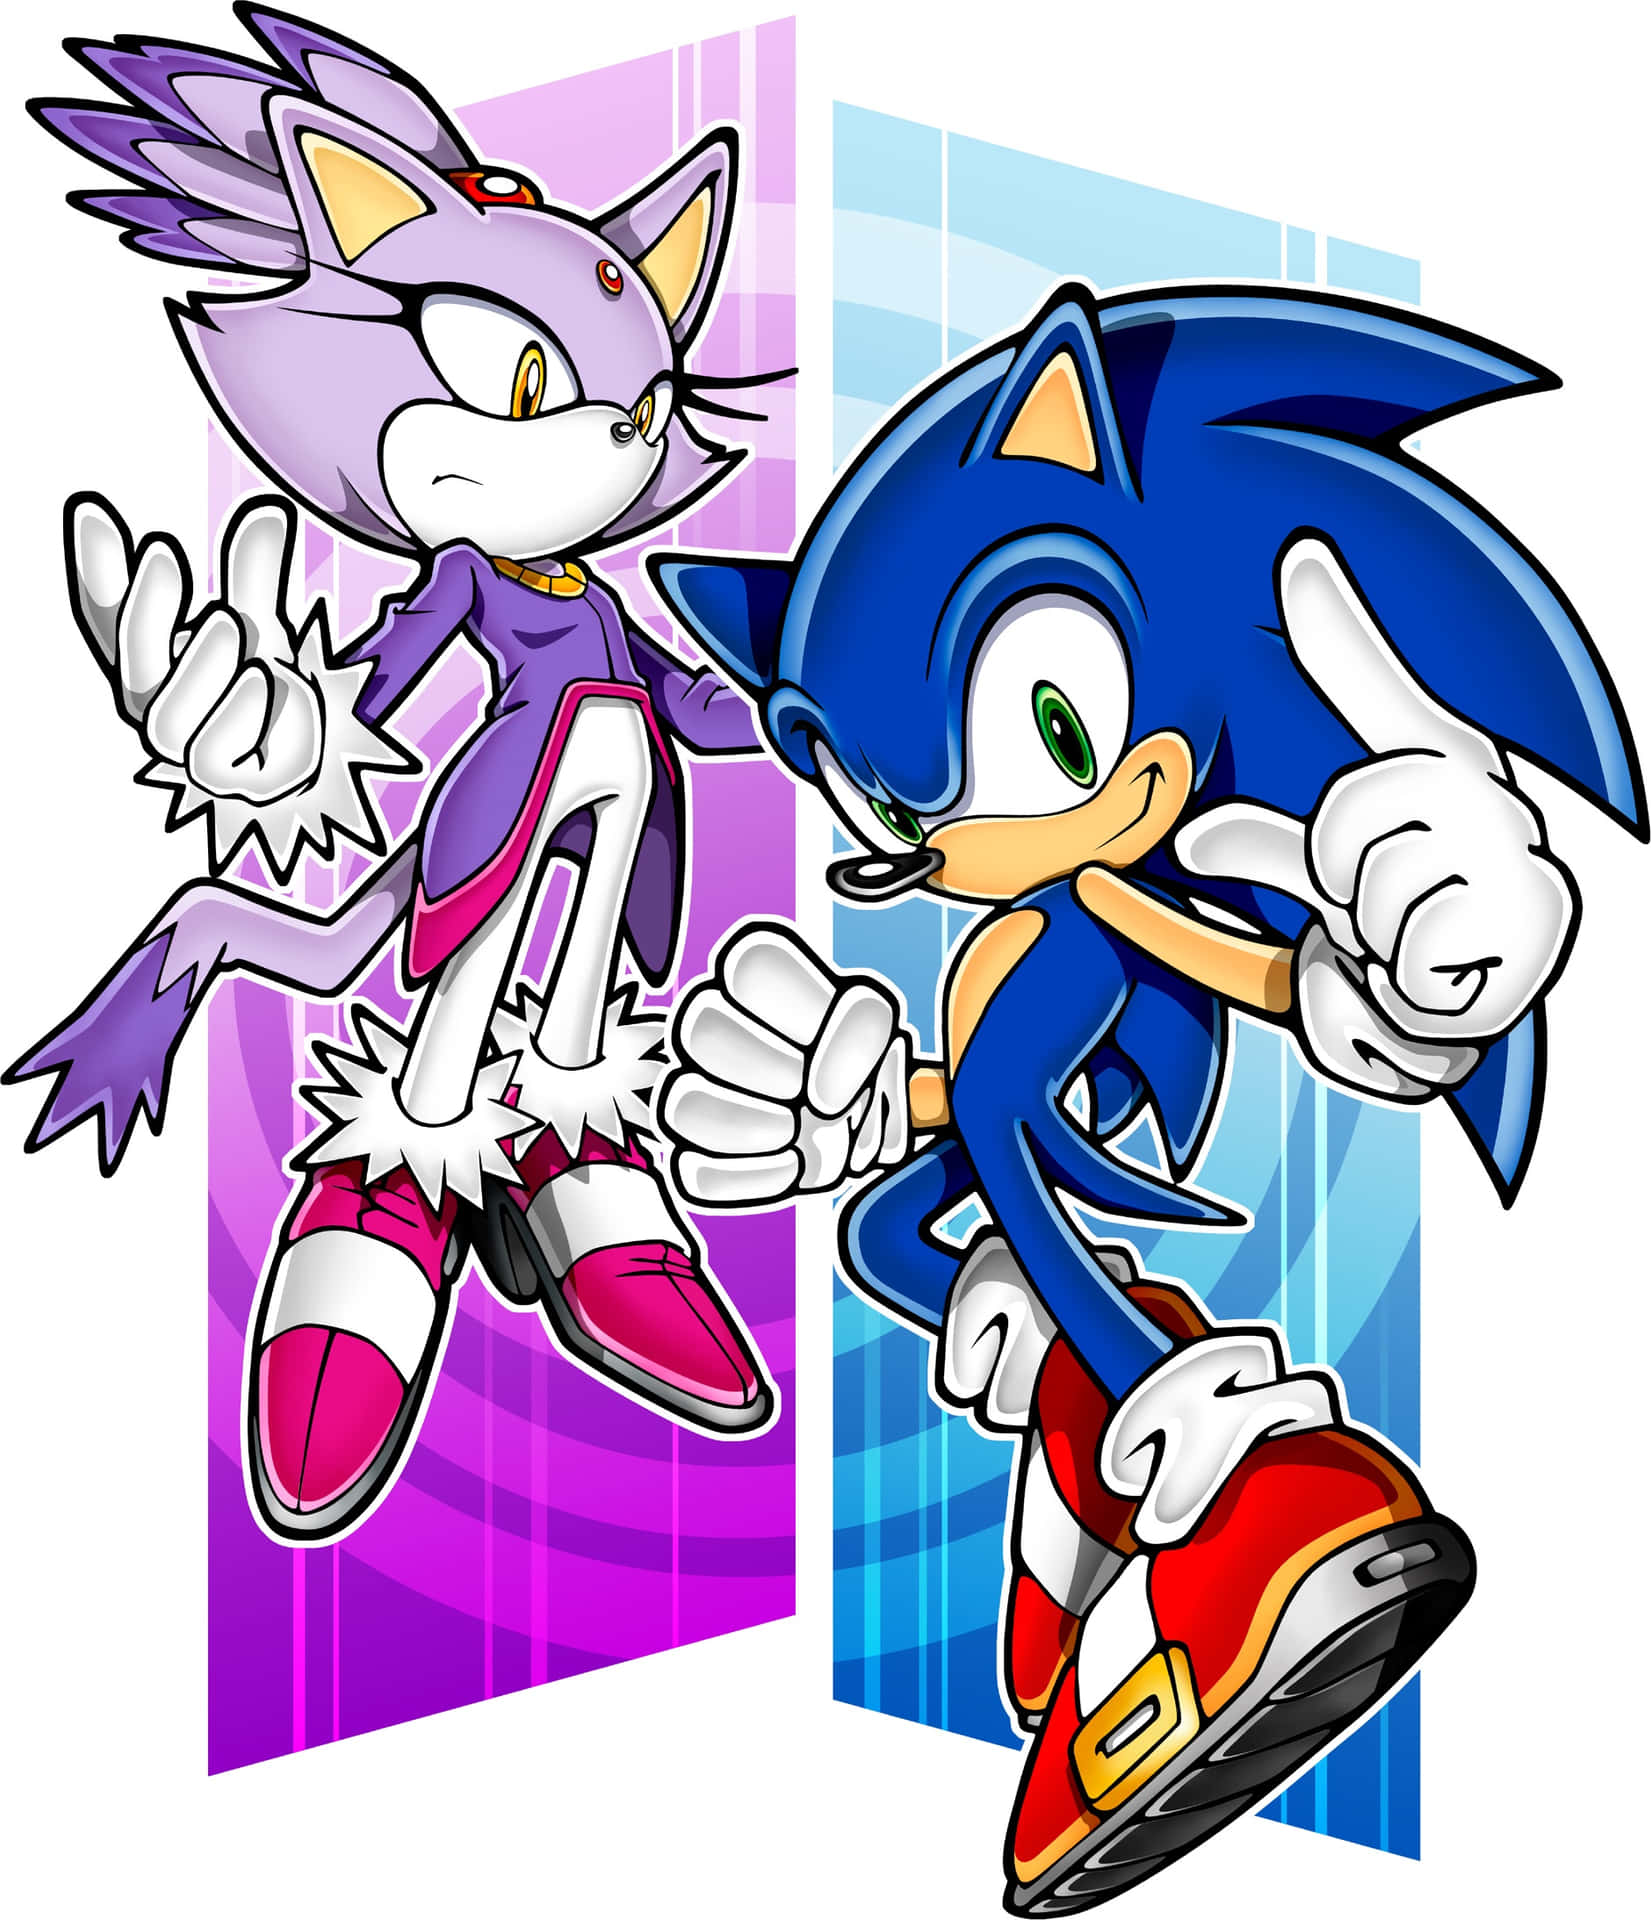 Sonic and Blaze Racing Through the Wind Wallpaper